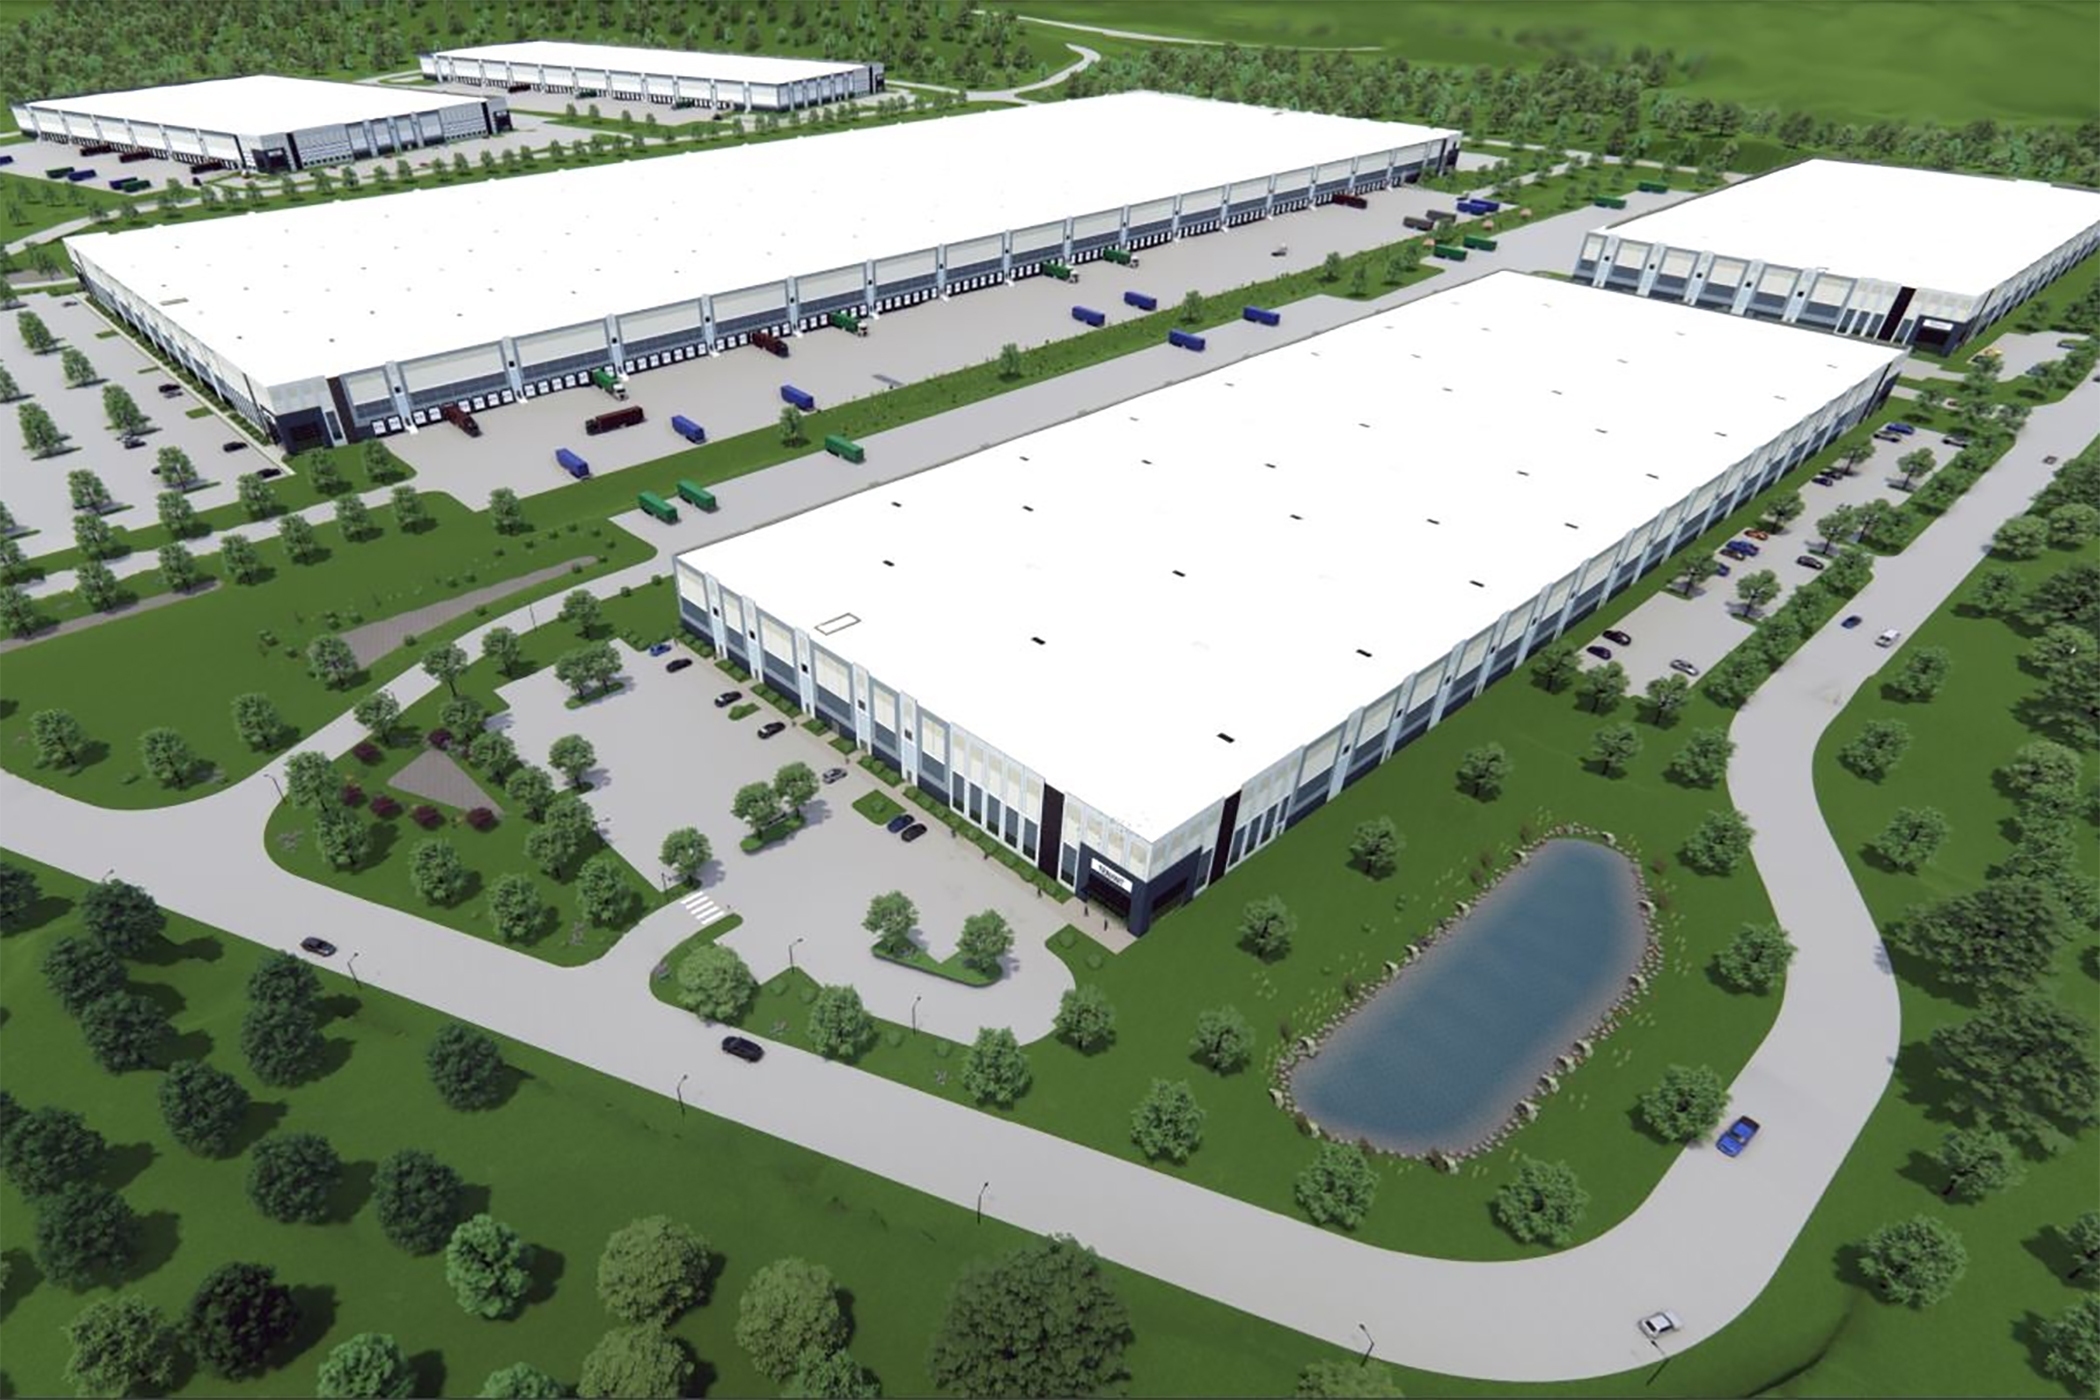 In one of New Jersey’s latest warehouse projects, Hartz Mountain Industries is in the process of seeking approval from the township of Roxbury, New Jersey, to build a 2.5 million-square-foot distribution complex. (Hartz Mountain Industries)